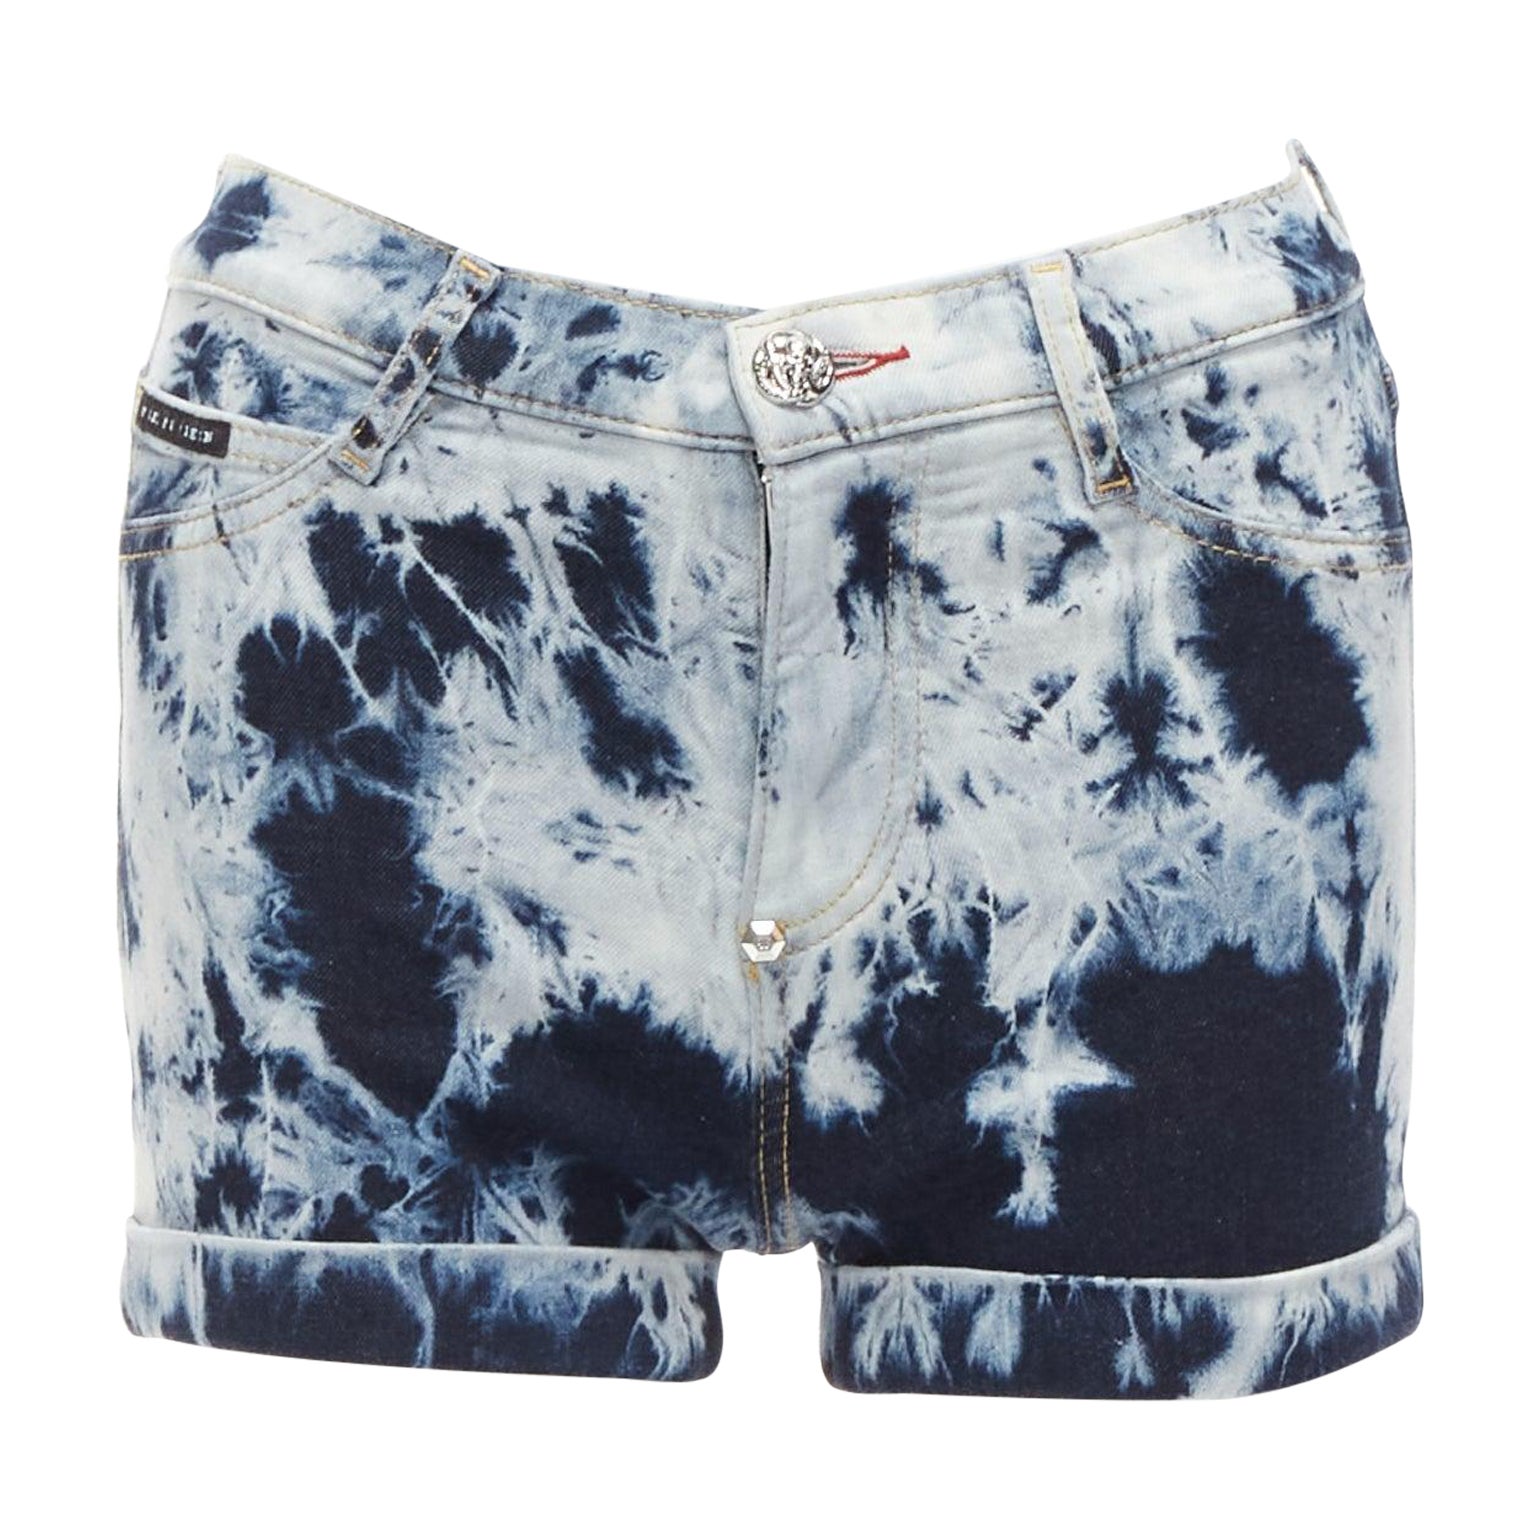 PHILLIP PLEIN High Waist Hot Pants blue tie dye washed cuffed shorts 25" For Sale